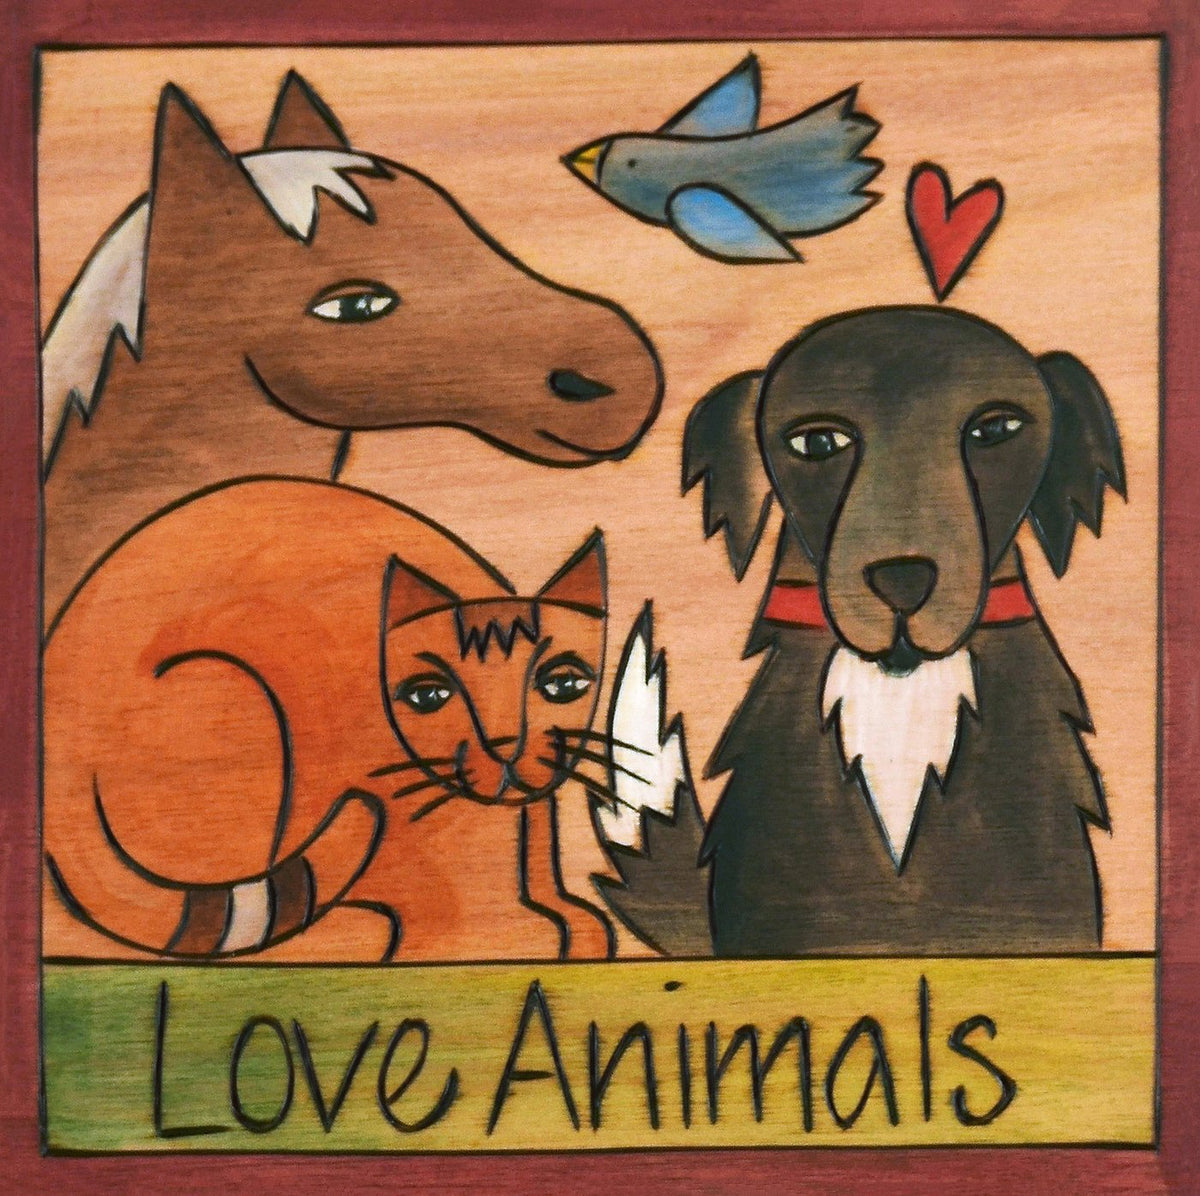 All Creatures Great and Small 6x6 Plaque